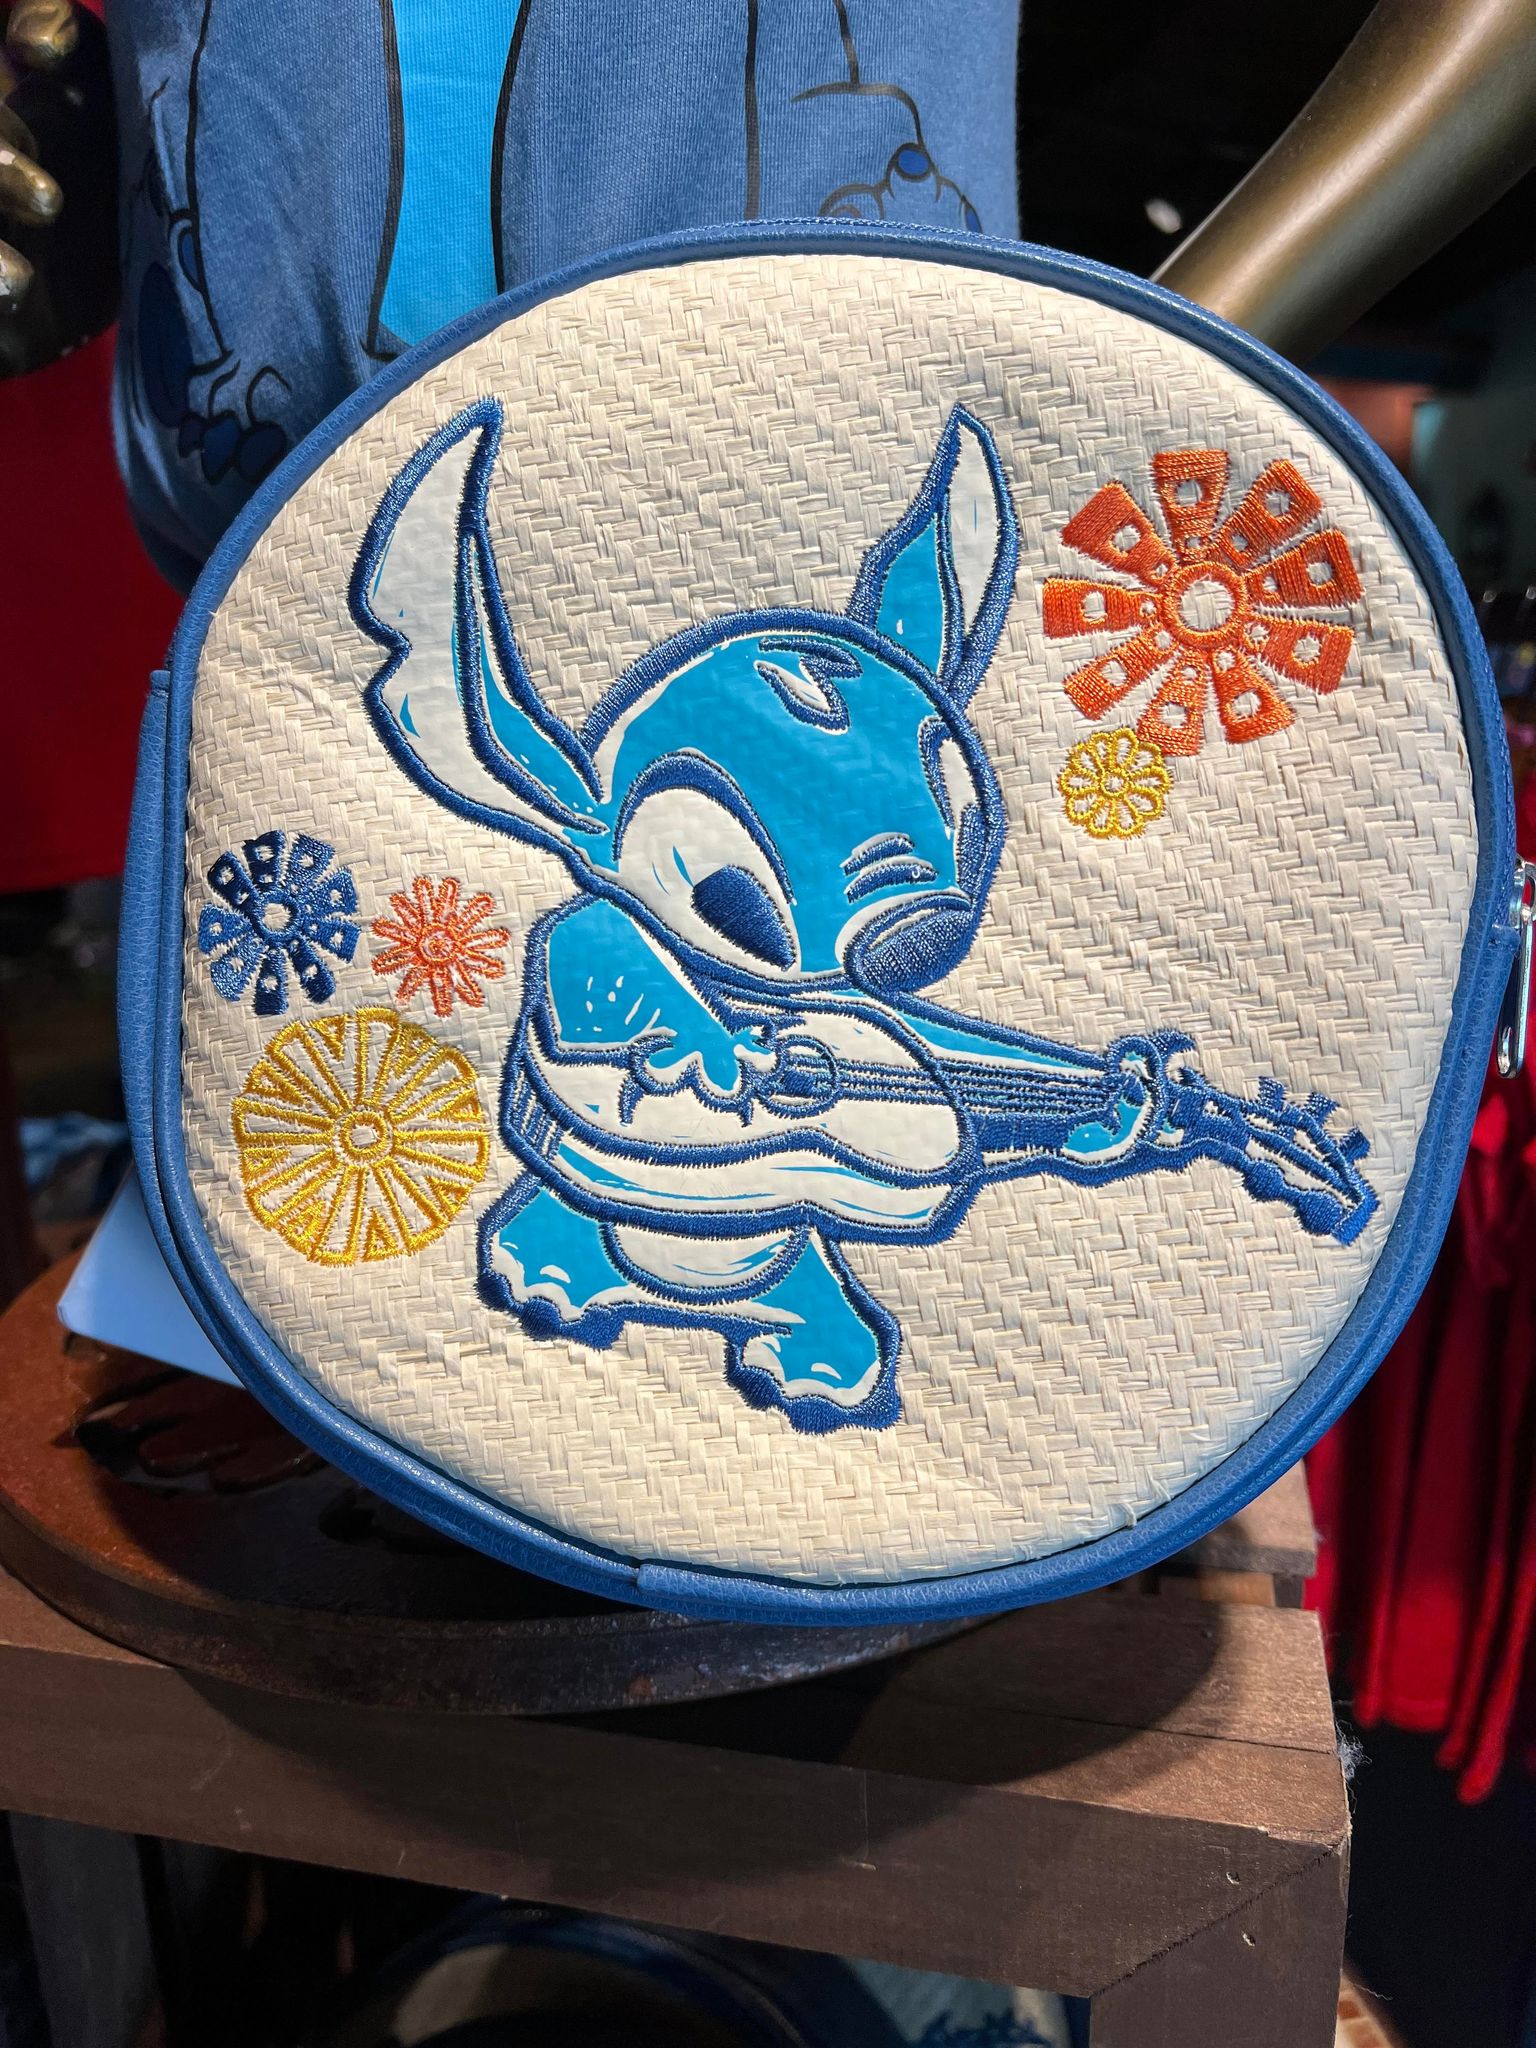 More Awesome Stitch Merchandise NOW Available at Discovery Trading in  Animal Kingdom 